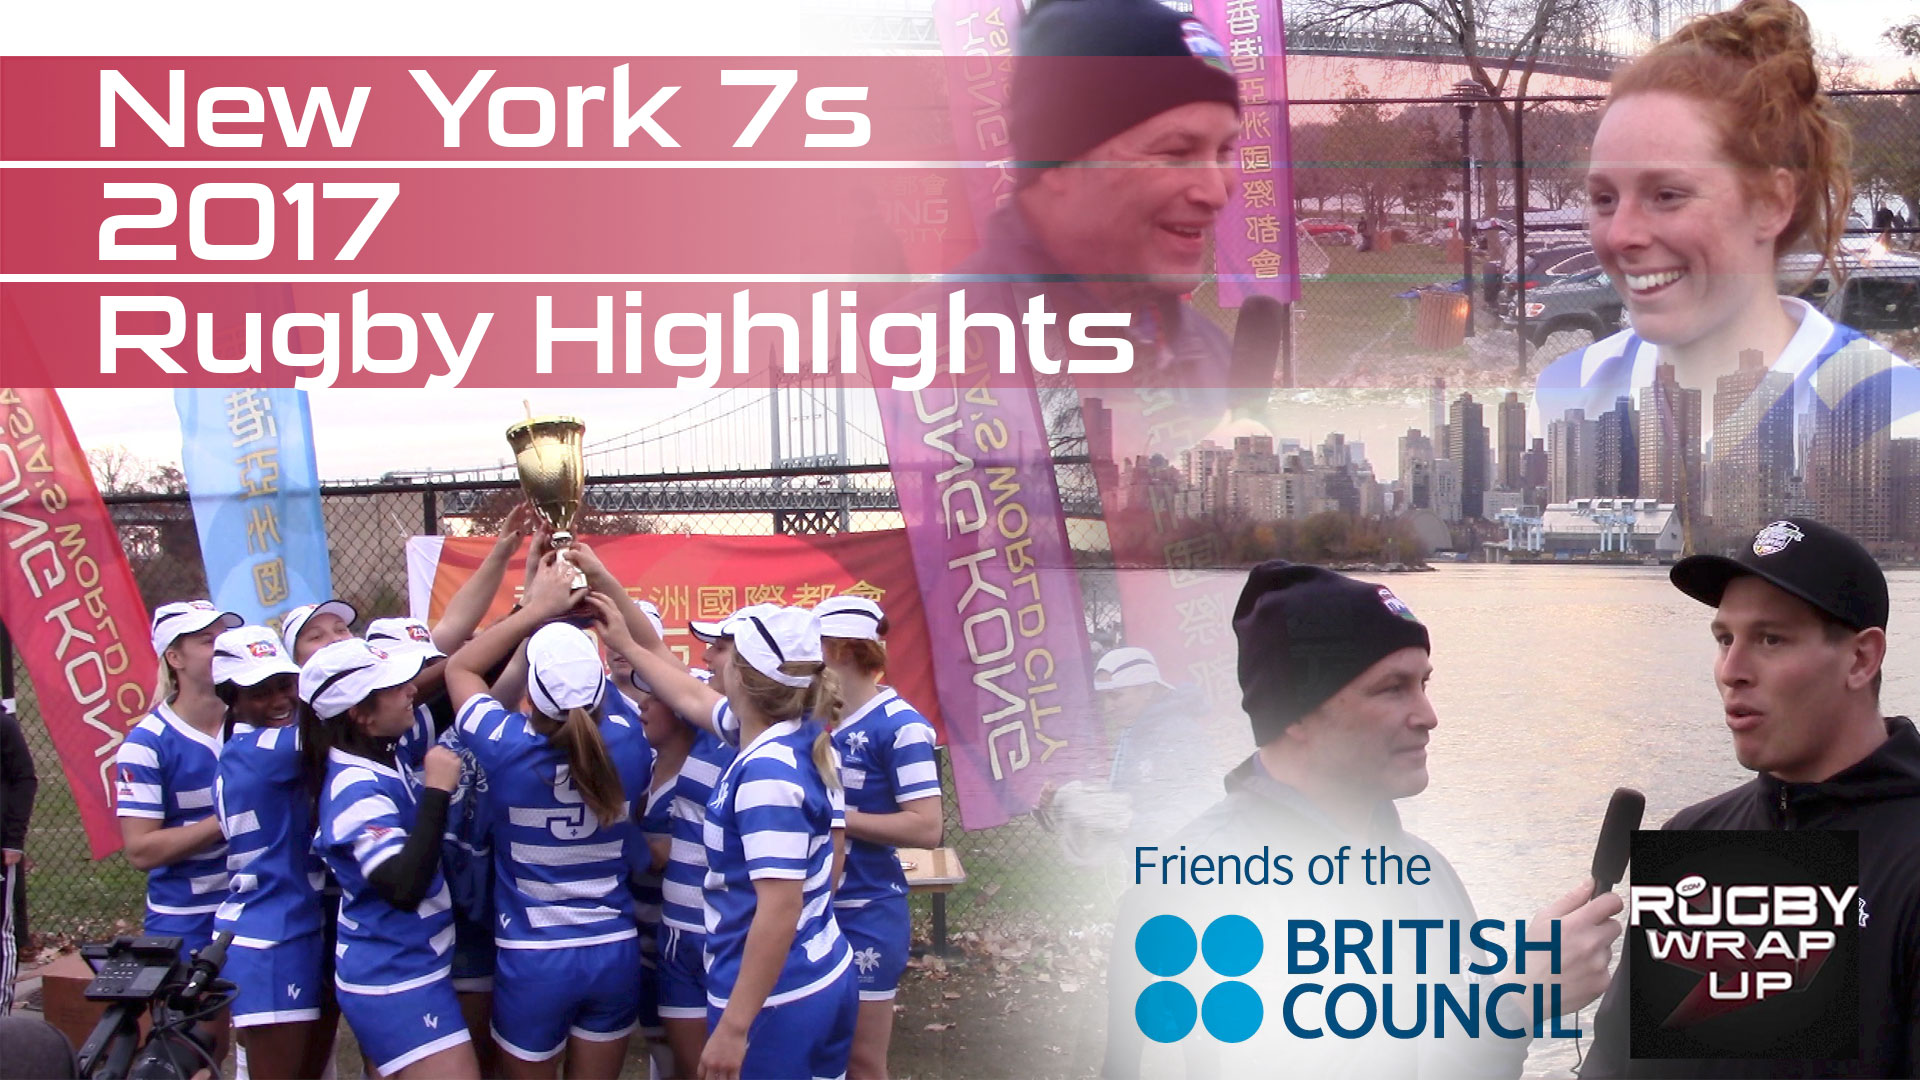 New York Rugby Club's NY7s: Interviews with WInners, Clips, Higlights, Recap